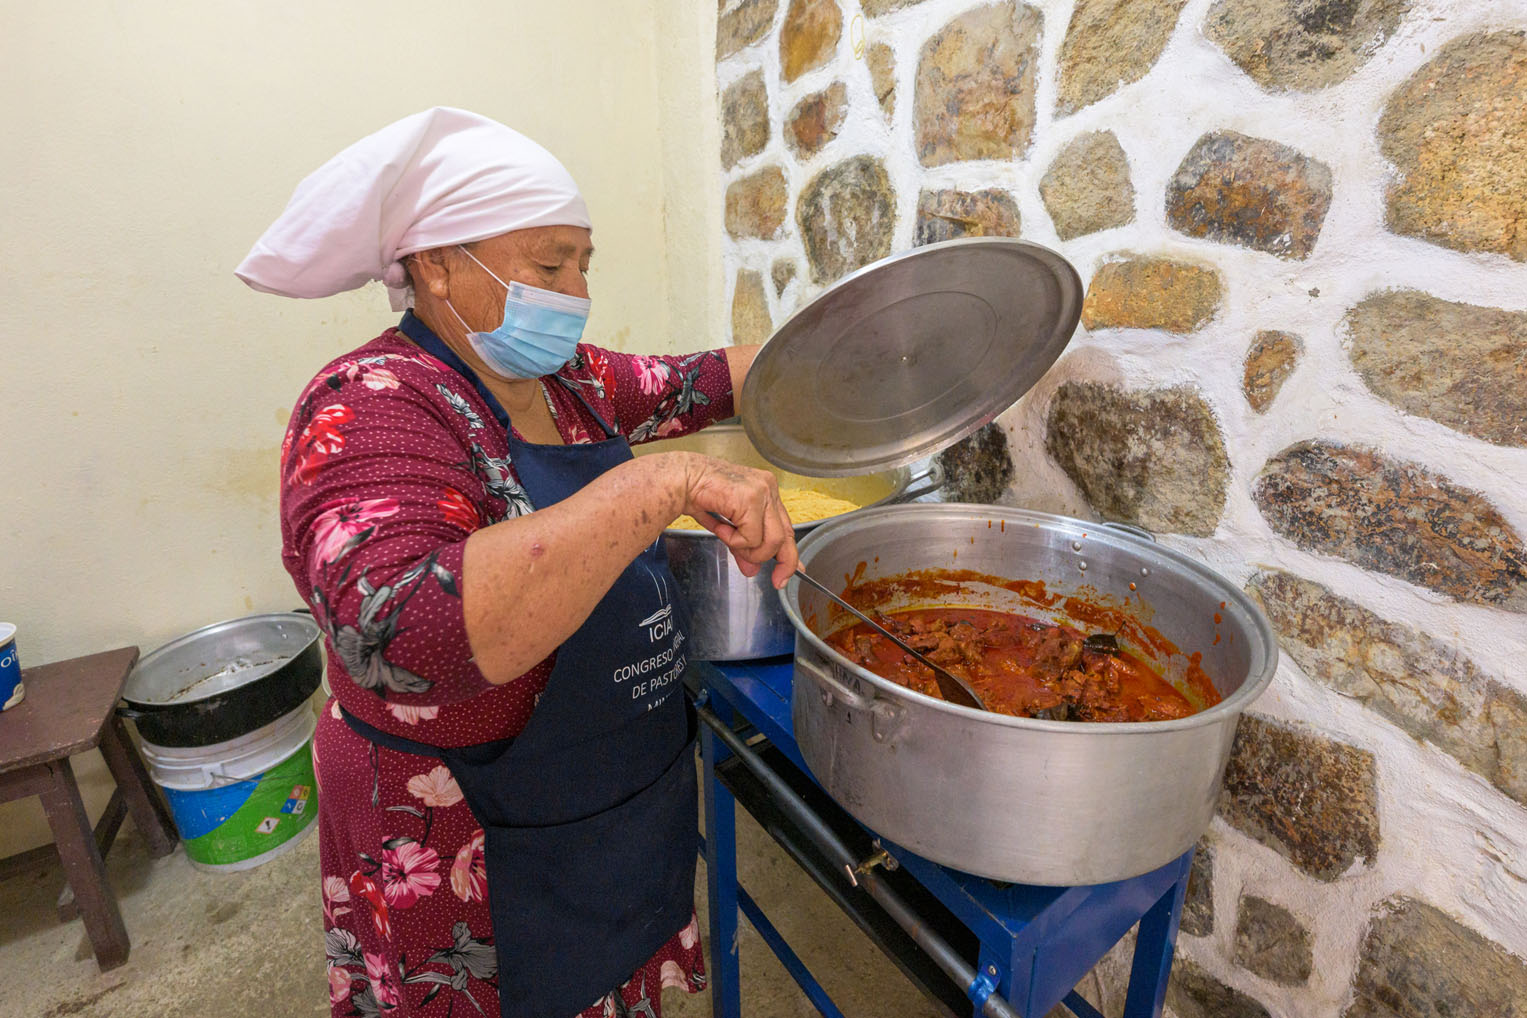 Samaritan's Purse even provided cooktops to help churches expand their hot meal ministries.